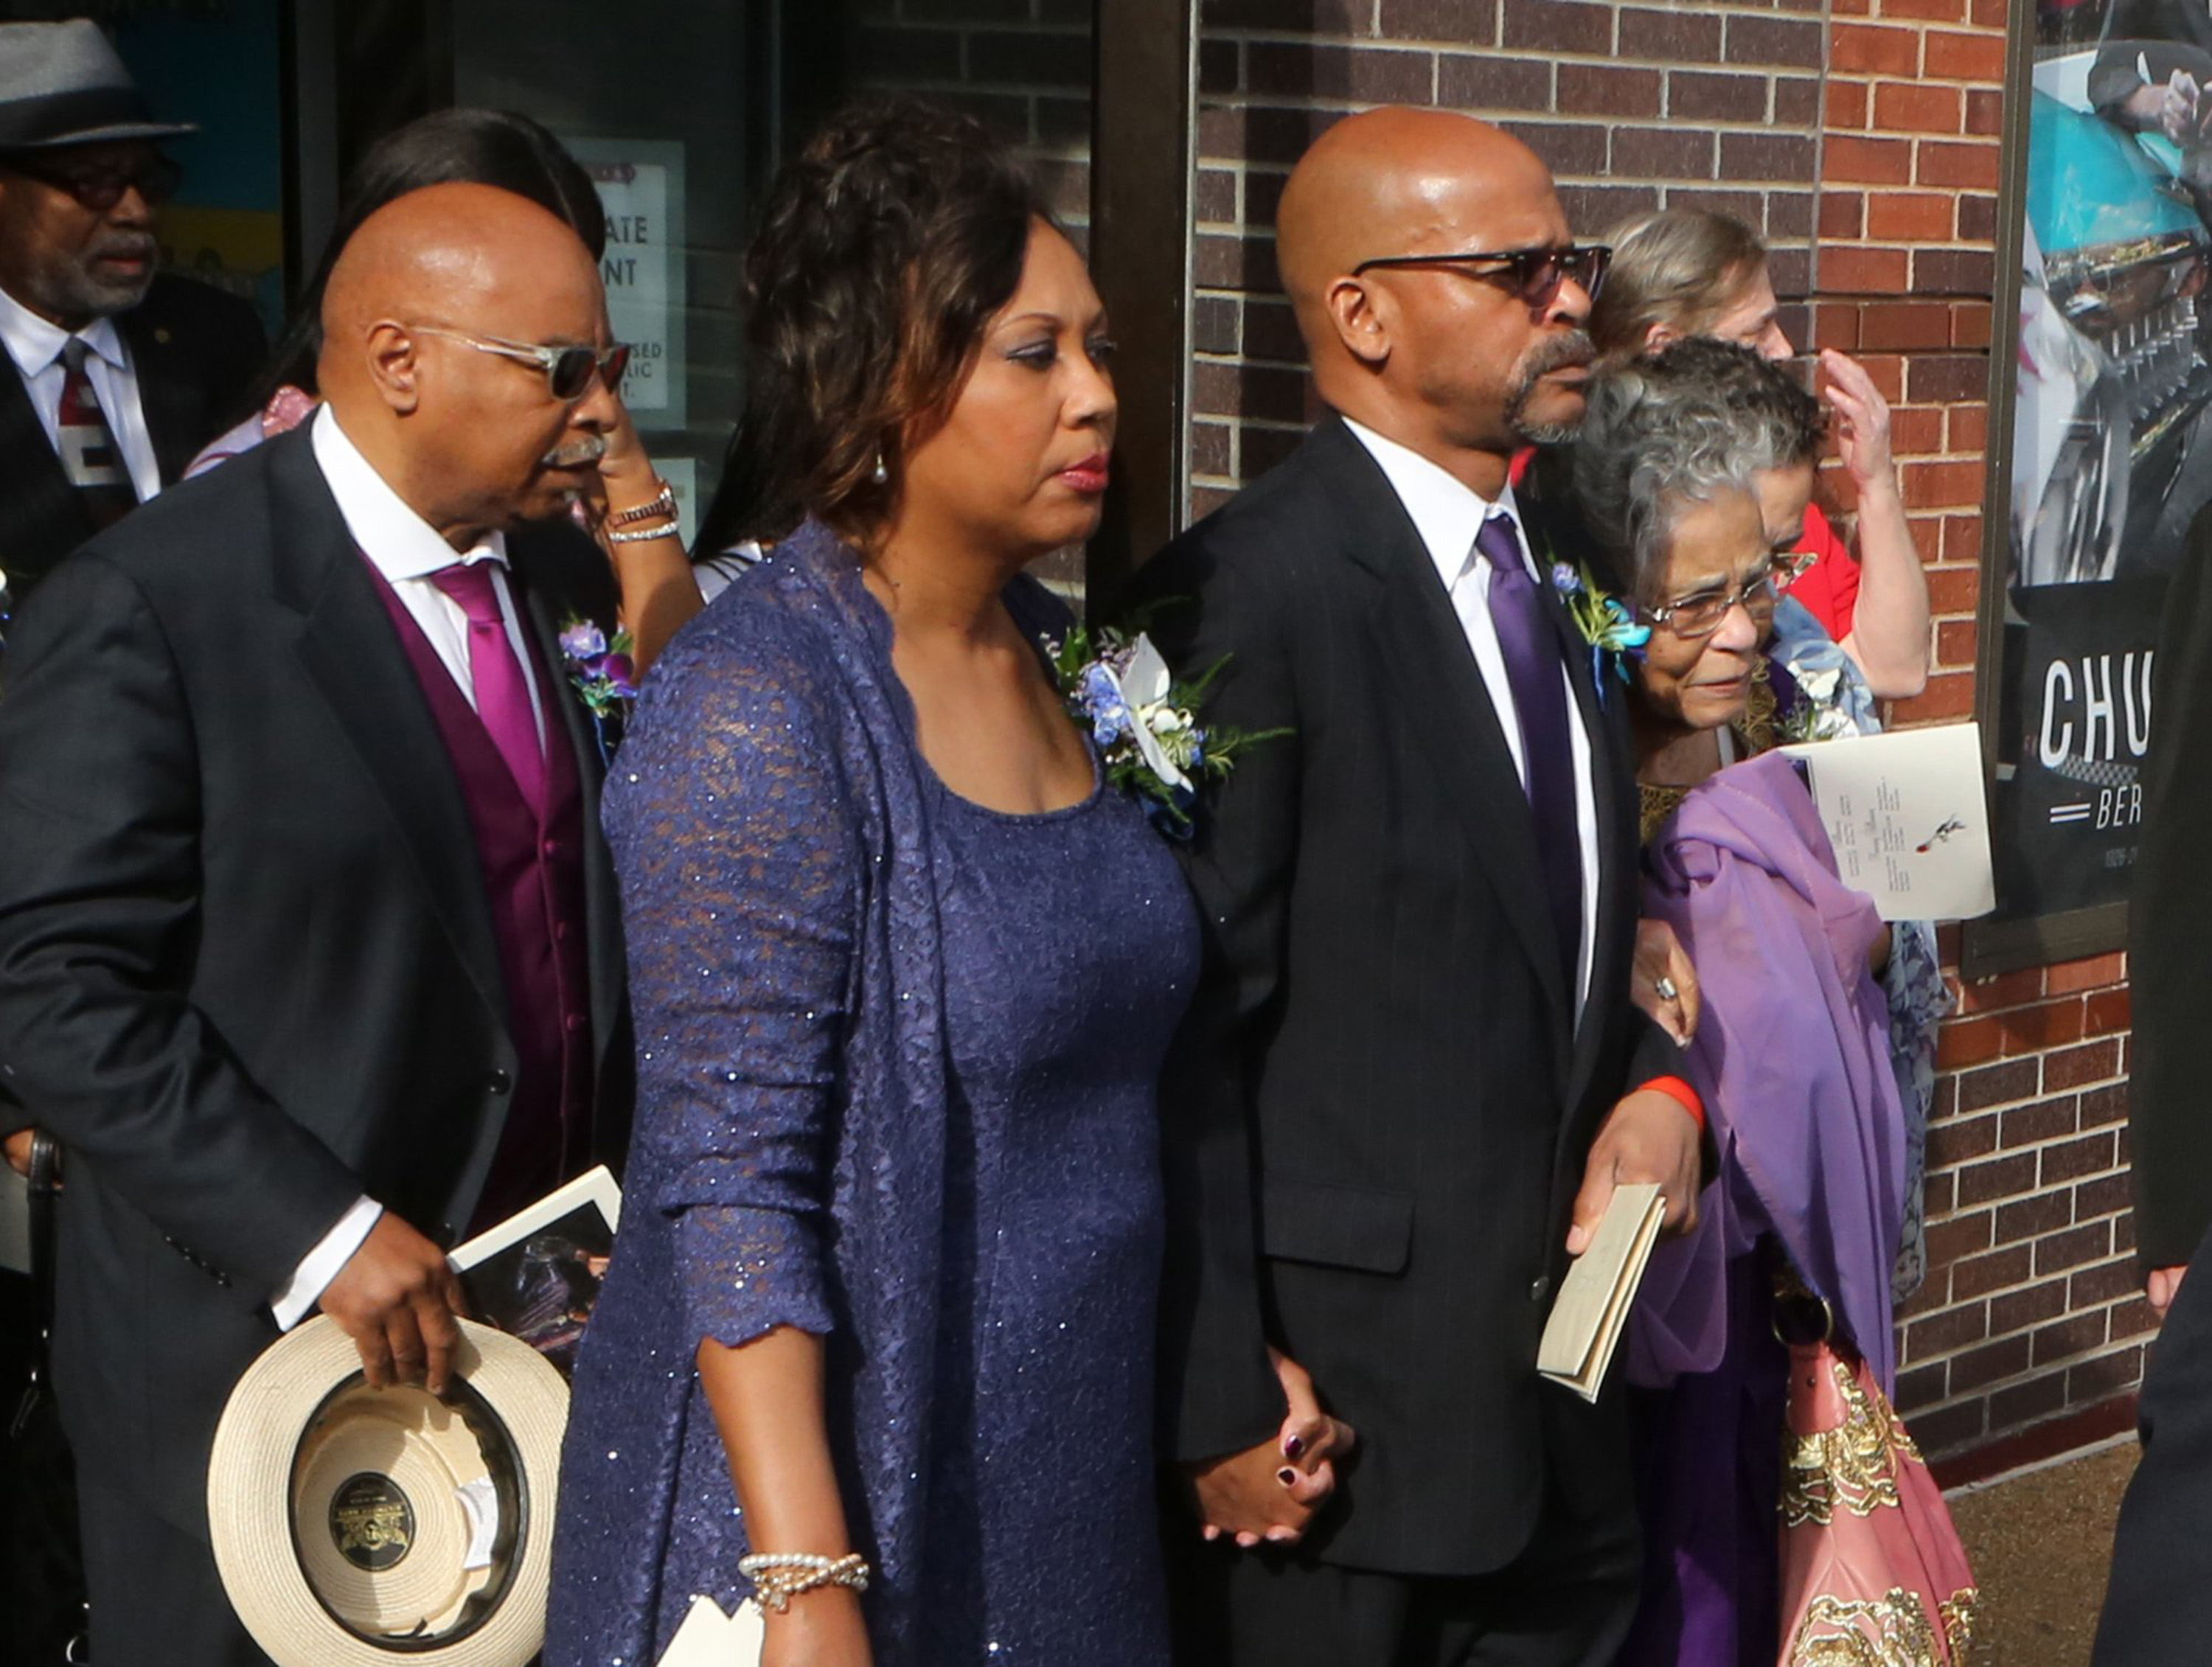 Charles Berry Jr. (right) with his wife and mother, Themetta Suggs (far right), leave The Pageant on Sunday, April 9, 2017 after the celebration of life for Chuck Berry in St. Louis, Missouri. | Source: Getty Images